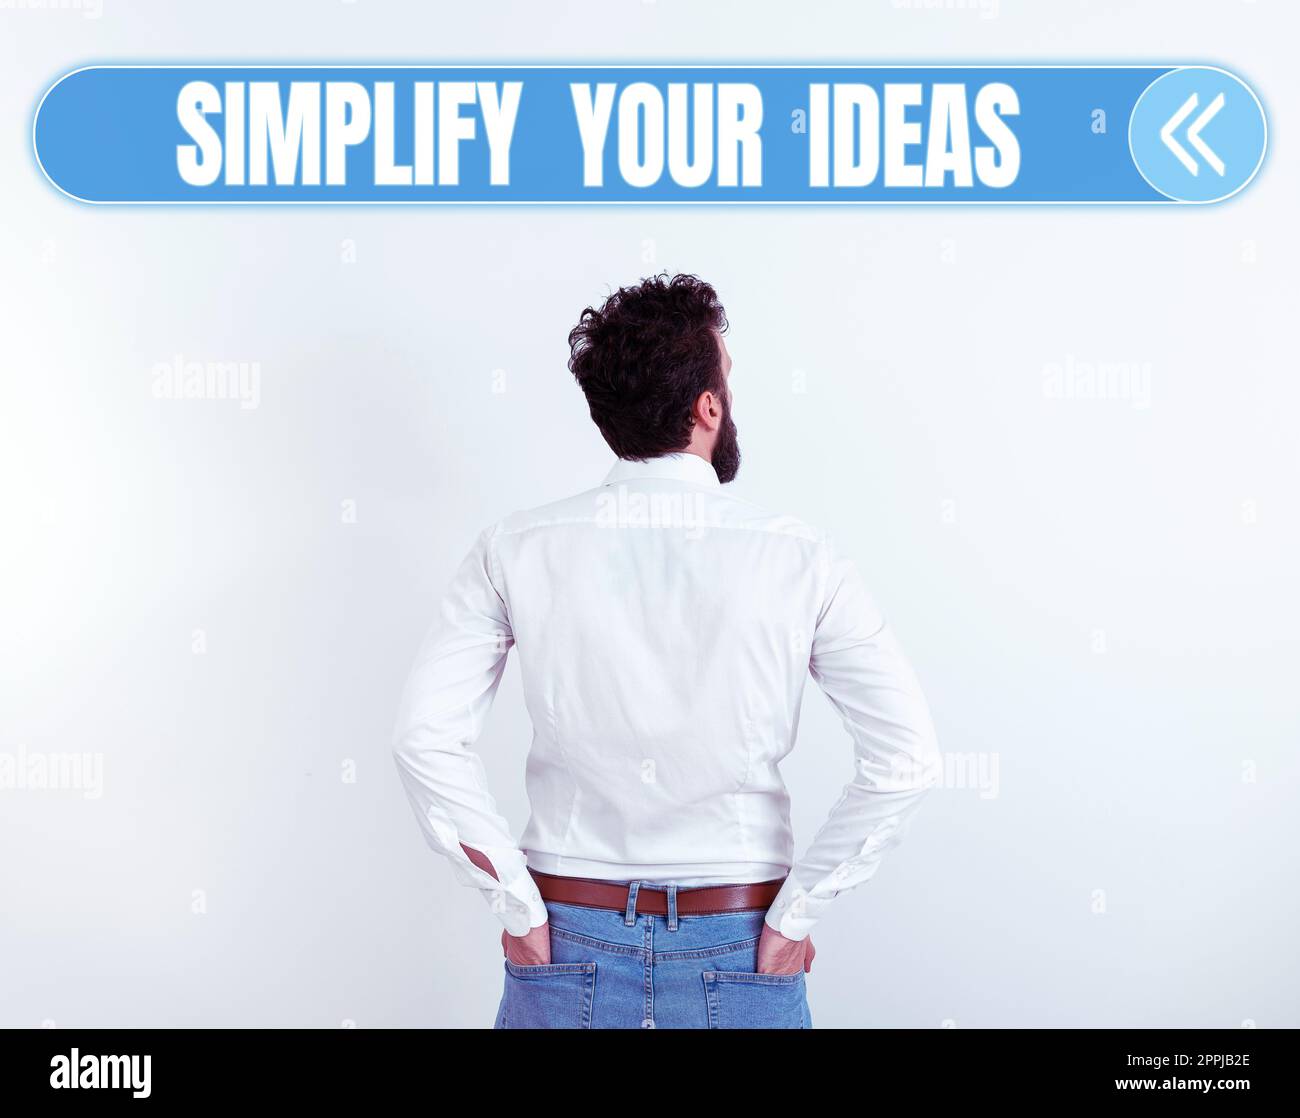 Sign displaying Simplify Your Ideas. Business showcase make simple or reduce things to basic essentials Stock Photo